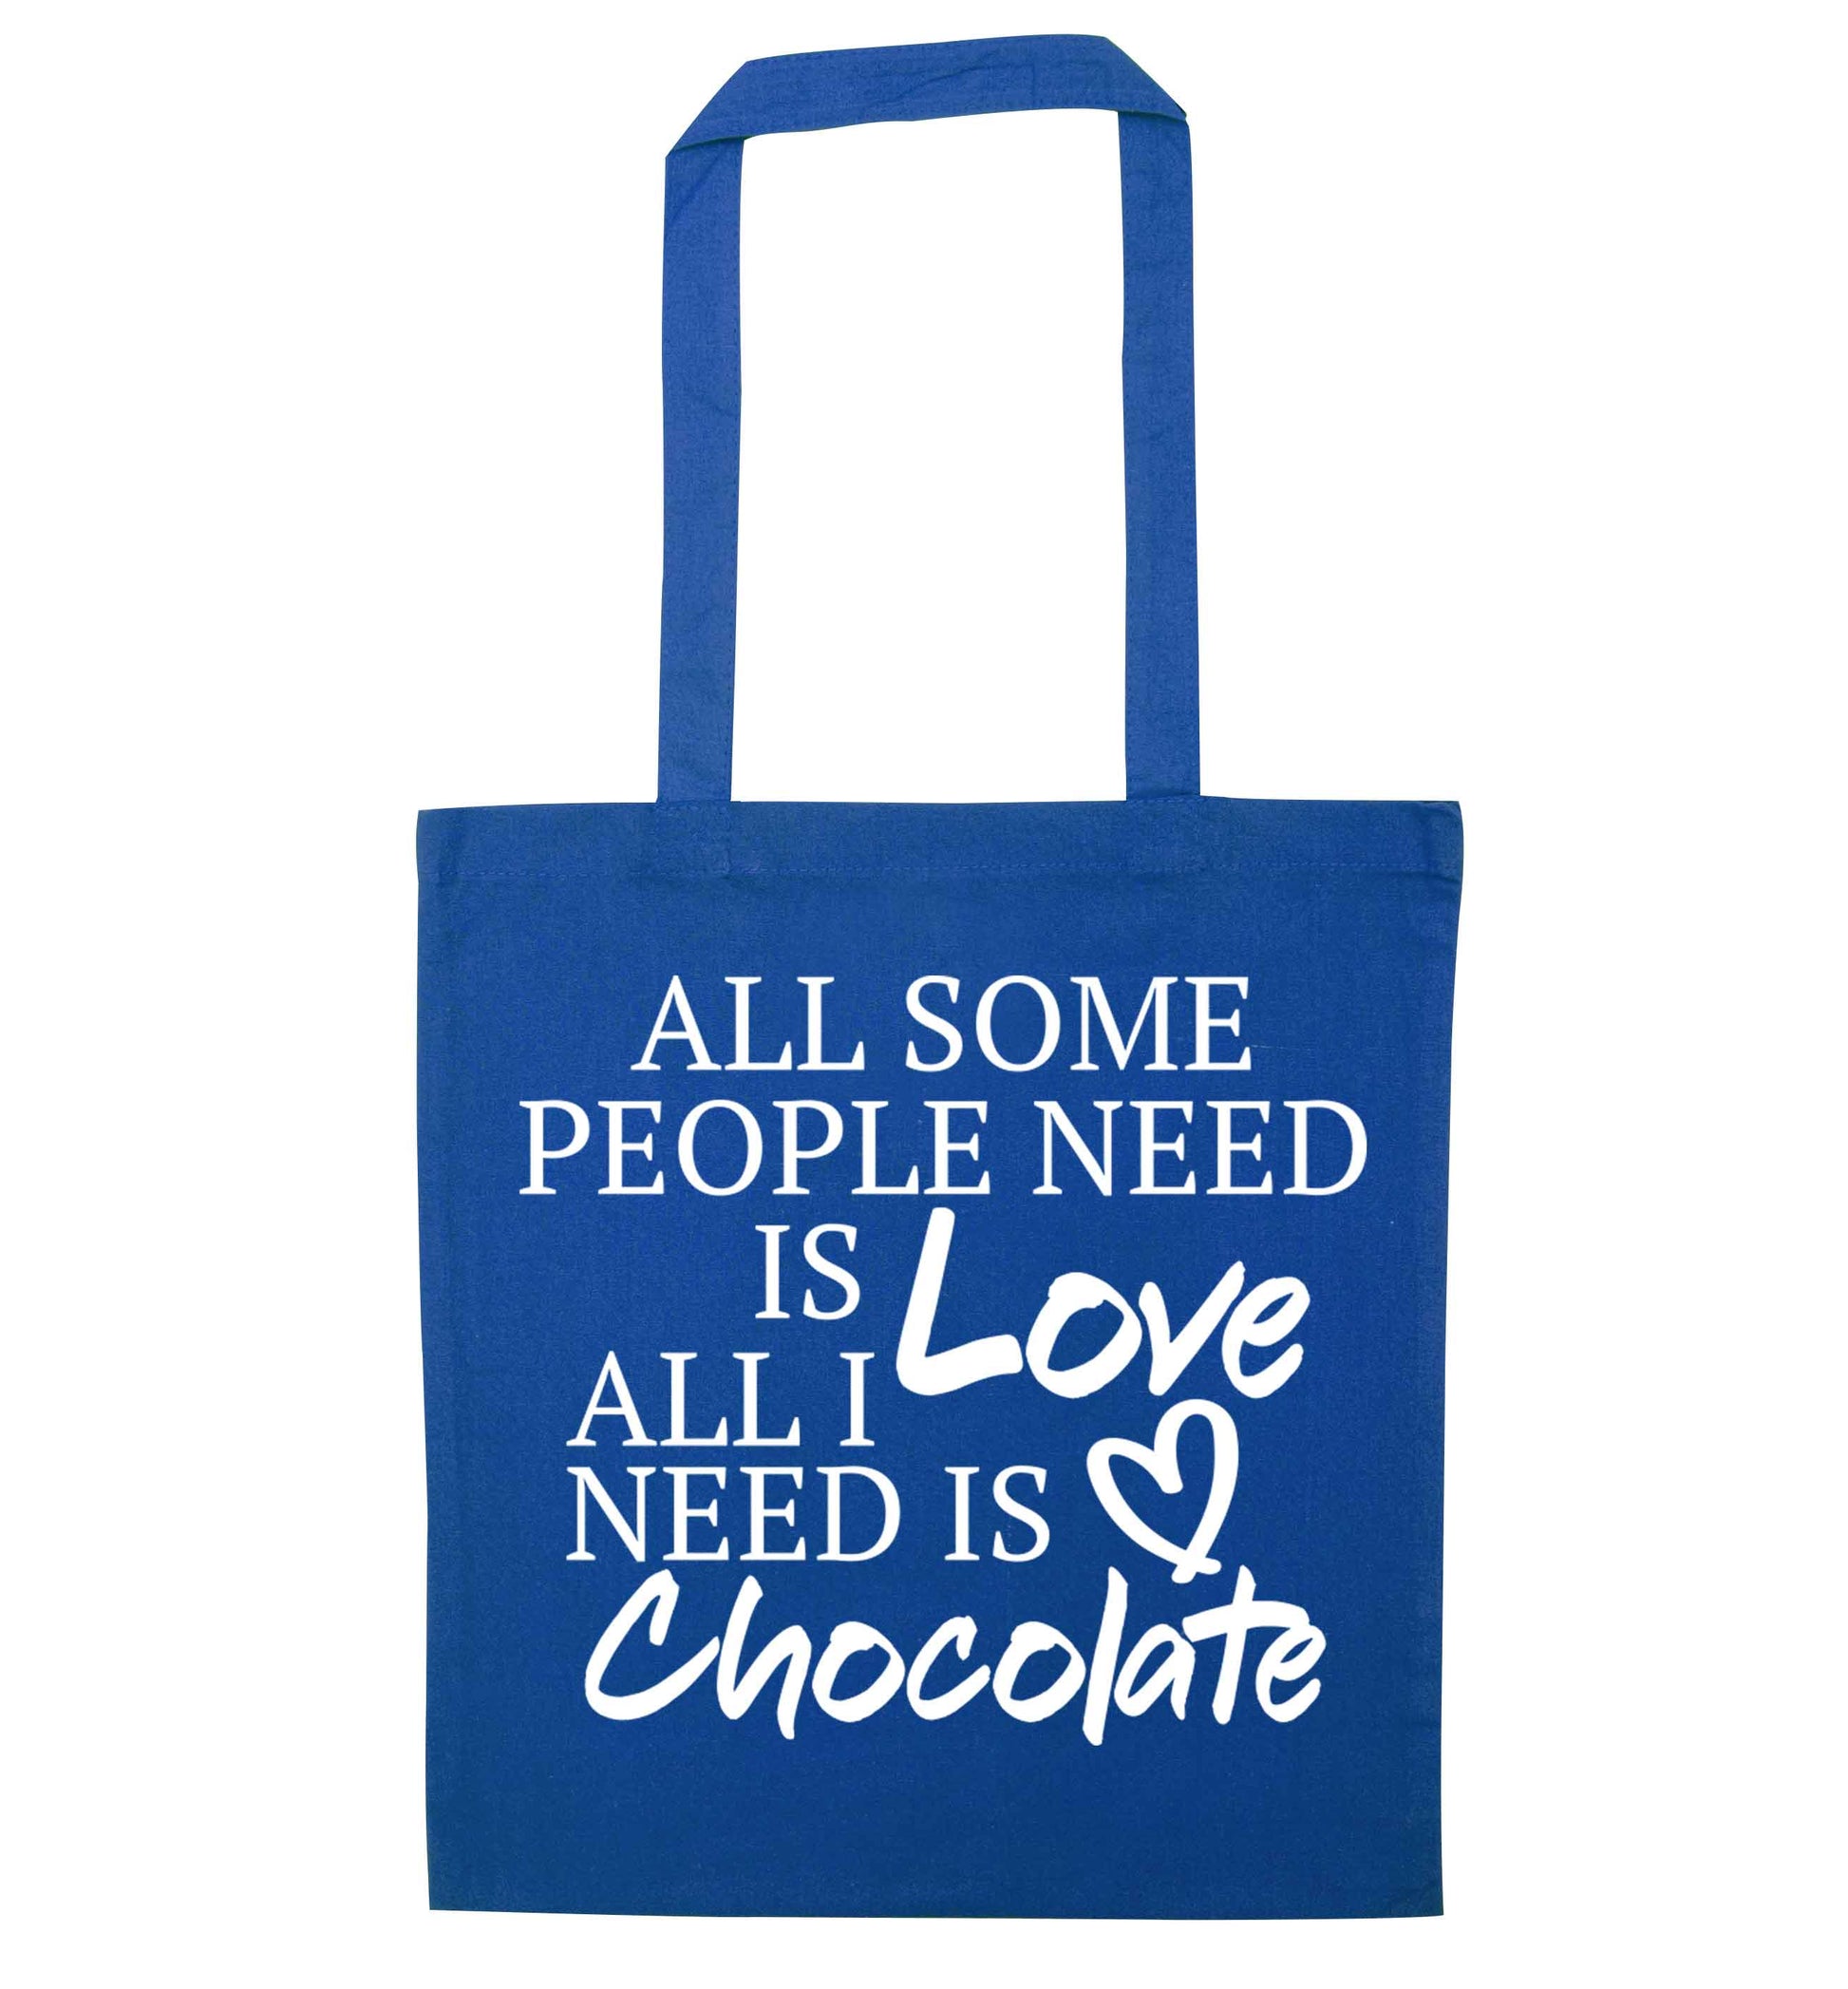 All some people need is love all I need is chocolate blue tote bag